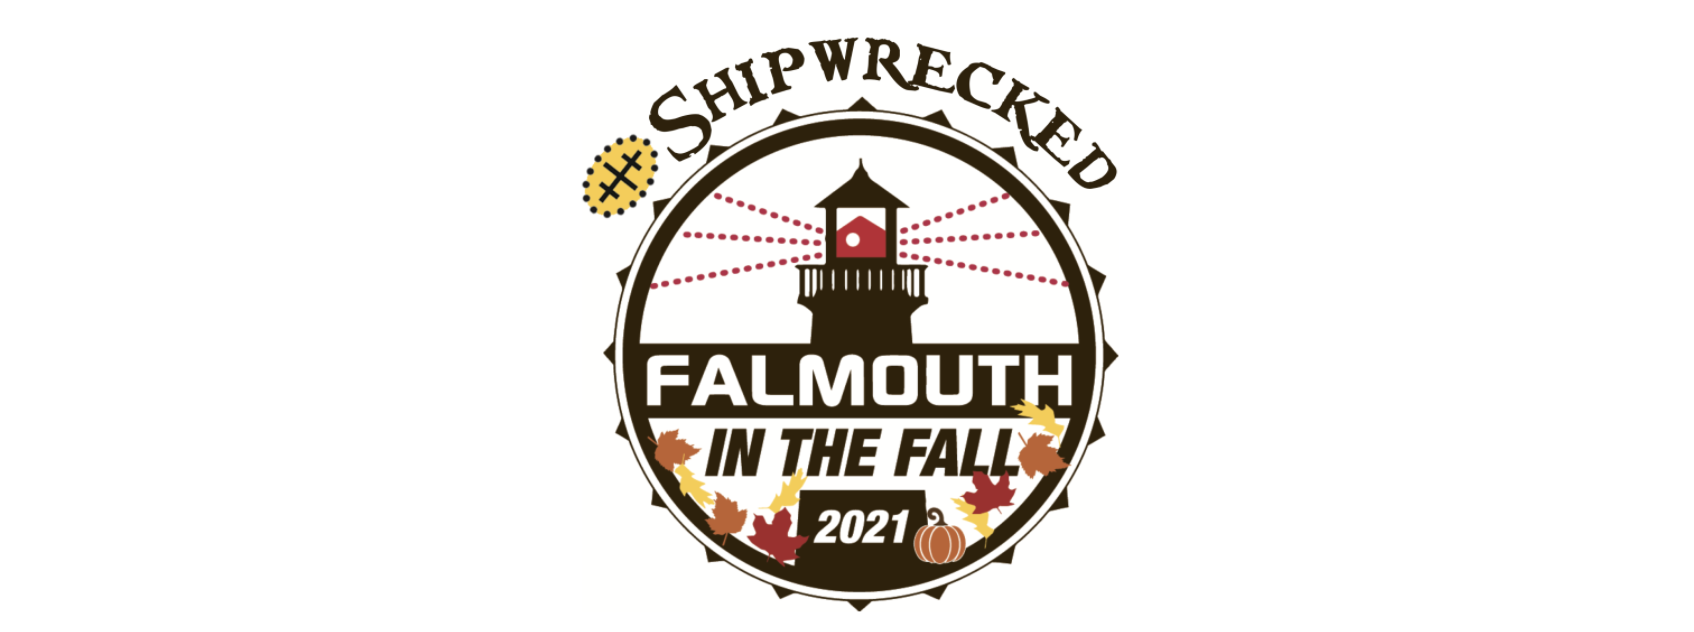 Falmouth in the Fall Road Race Secures Title Sponsor Falmouth Road Race